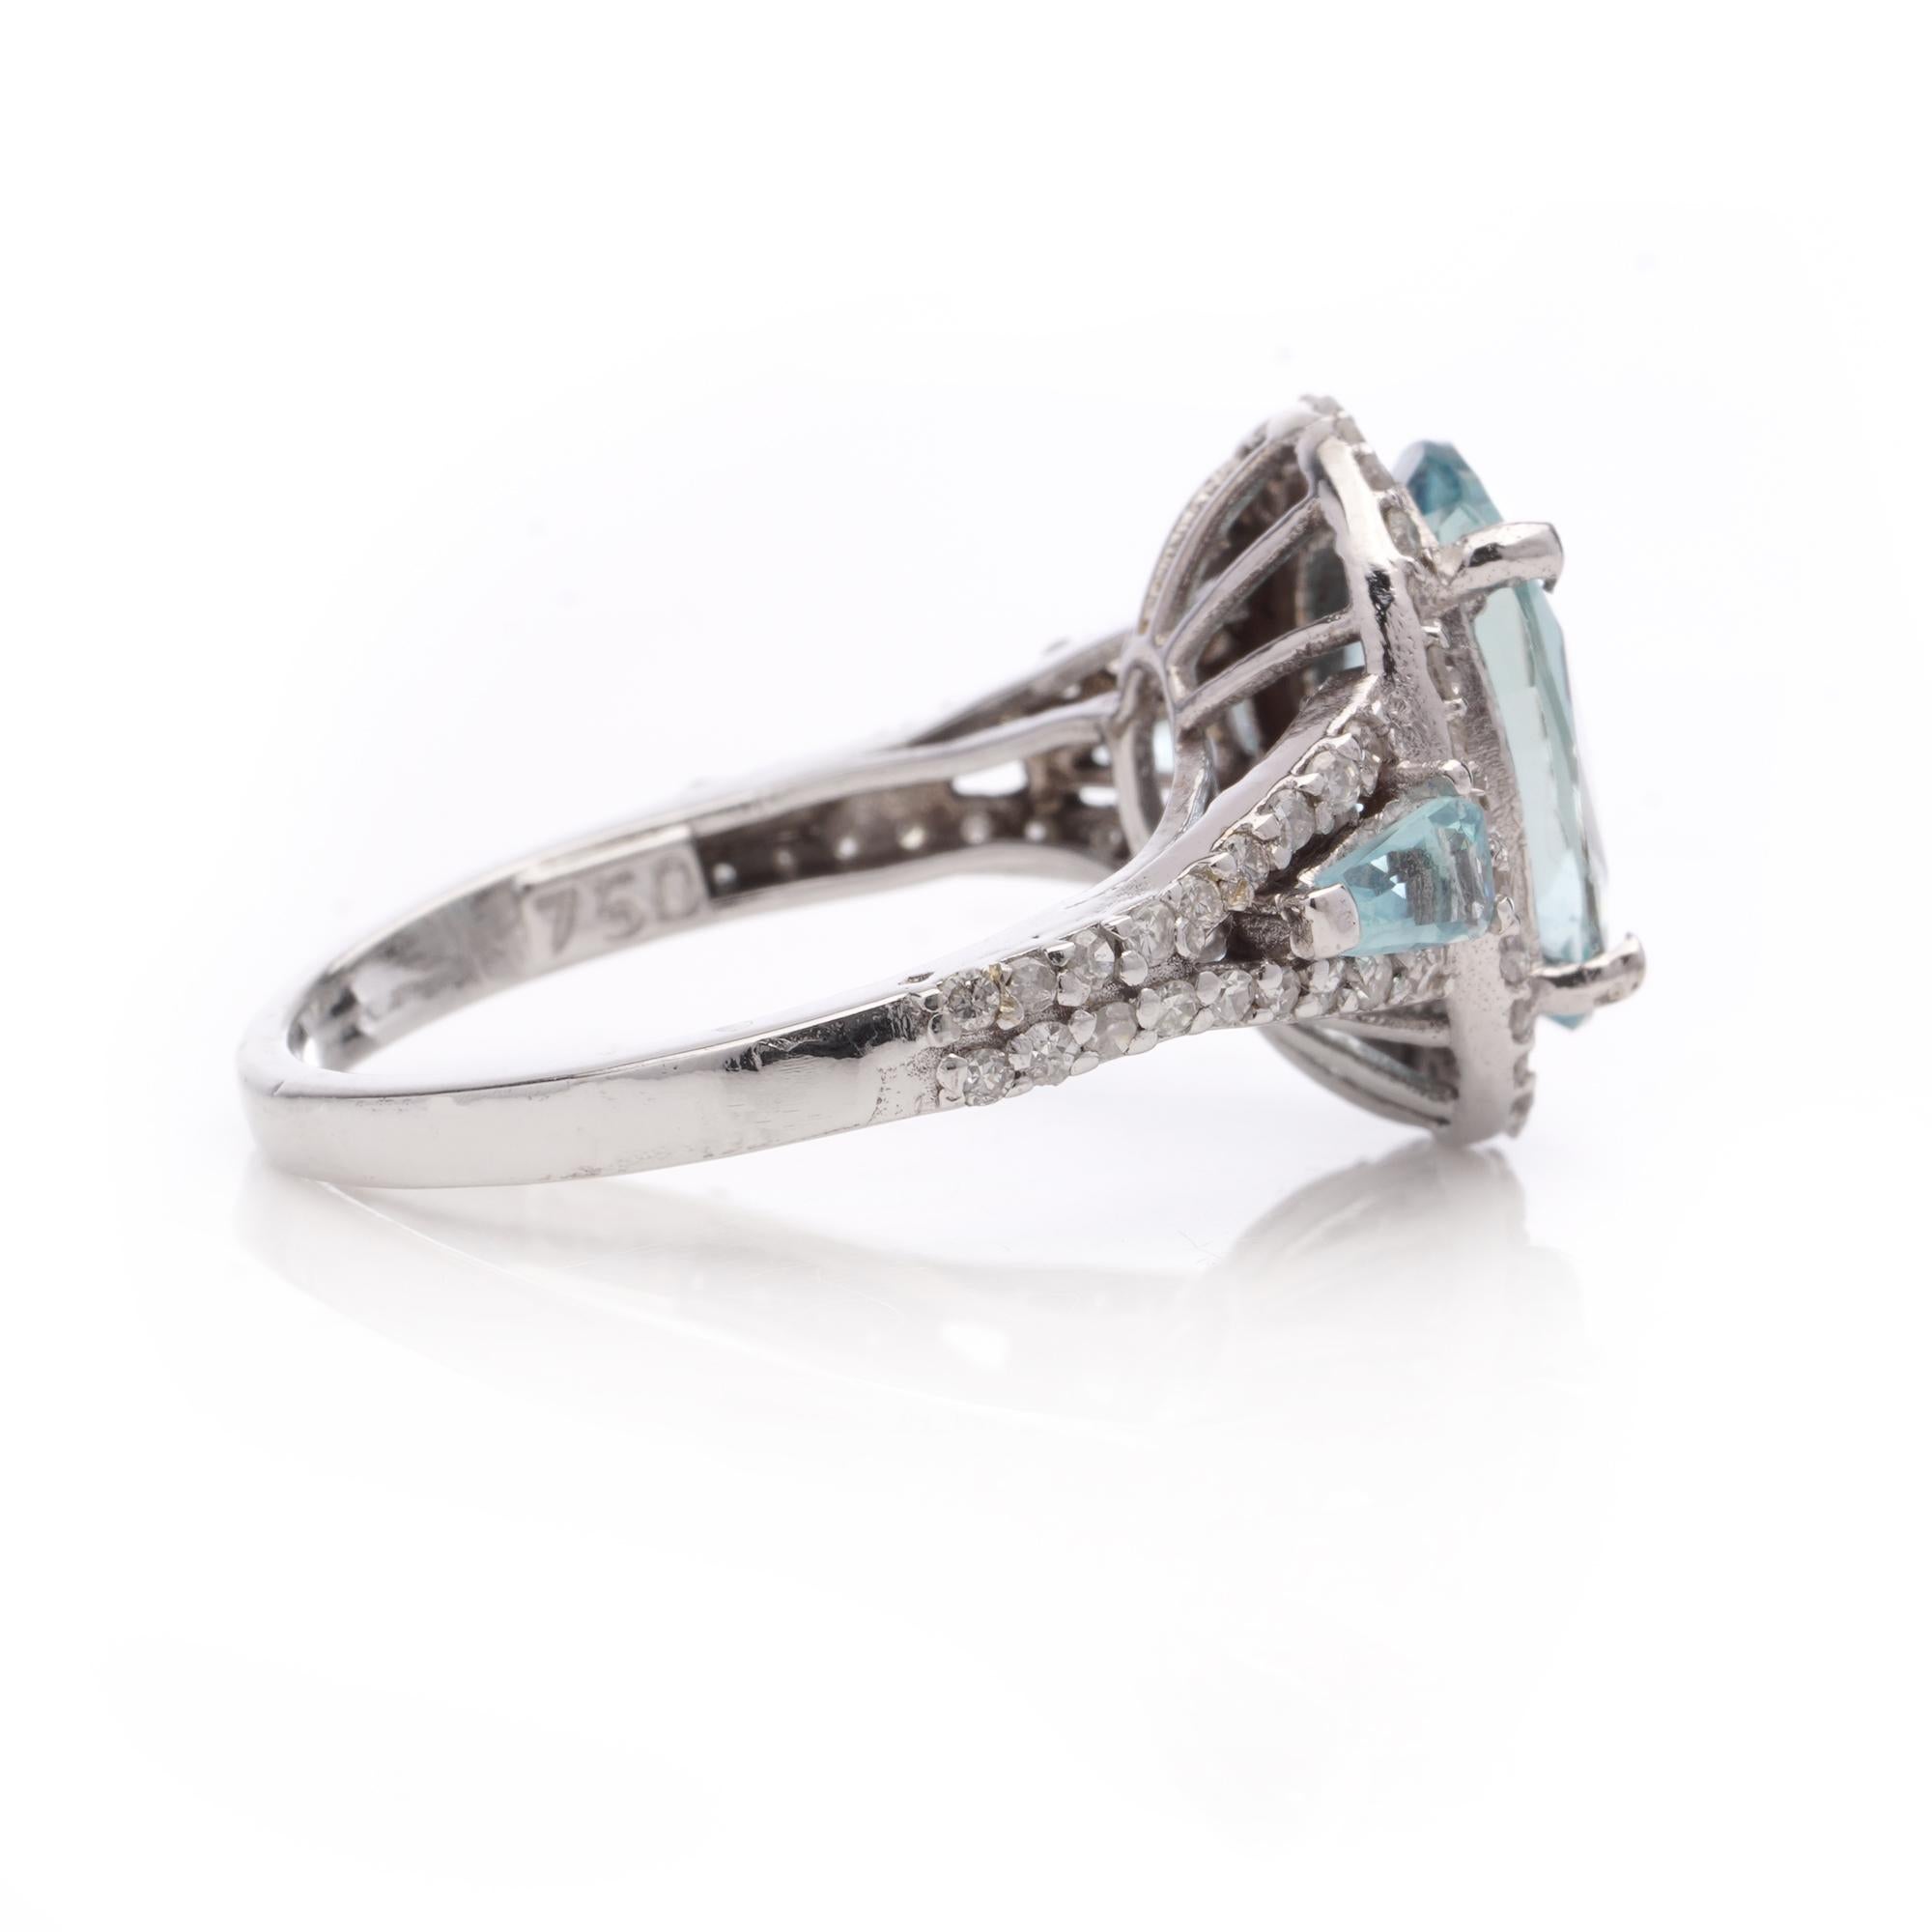 18 Karat White Gold Ladies' 2.90 Carats Aquamarine Cluster Ring In Excellent Condition For Sale In Braintree, GB